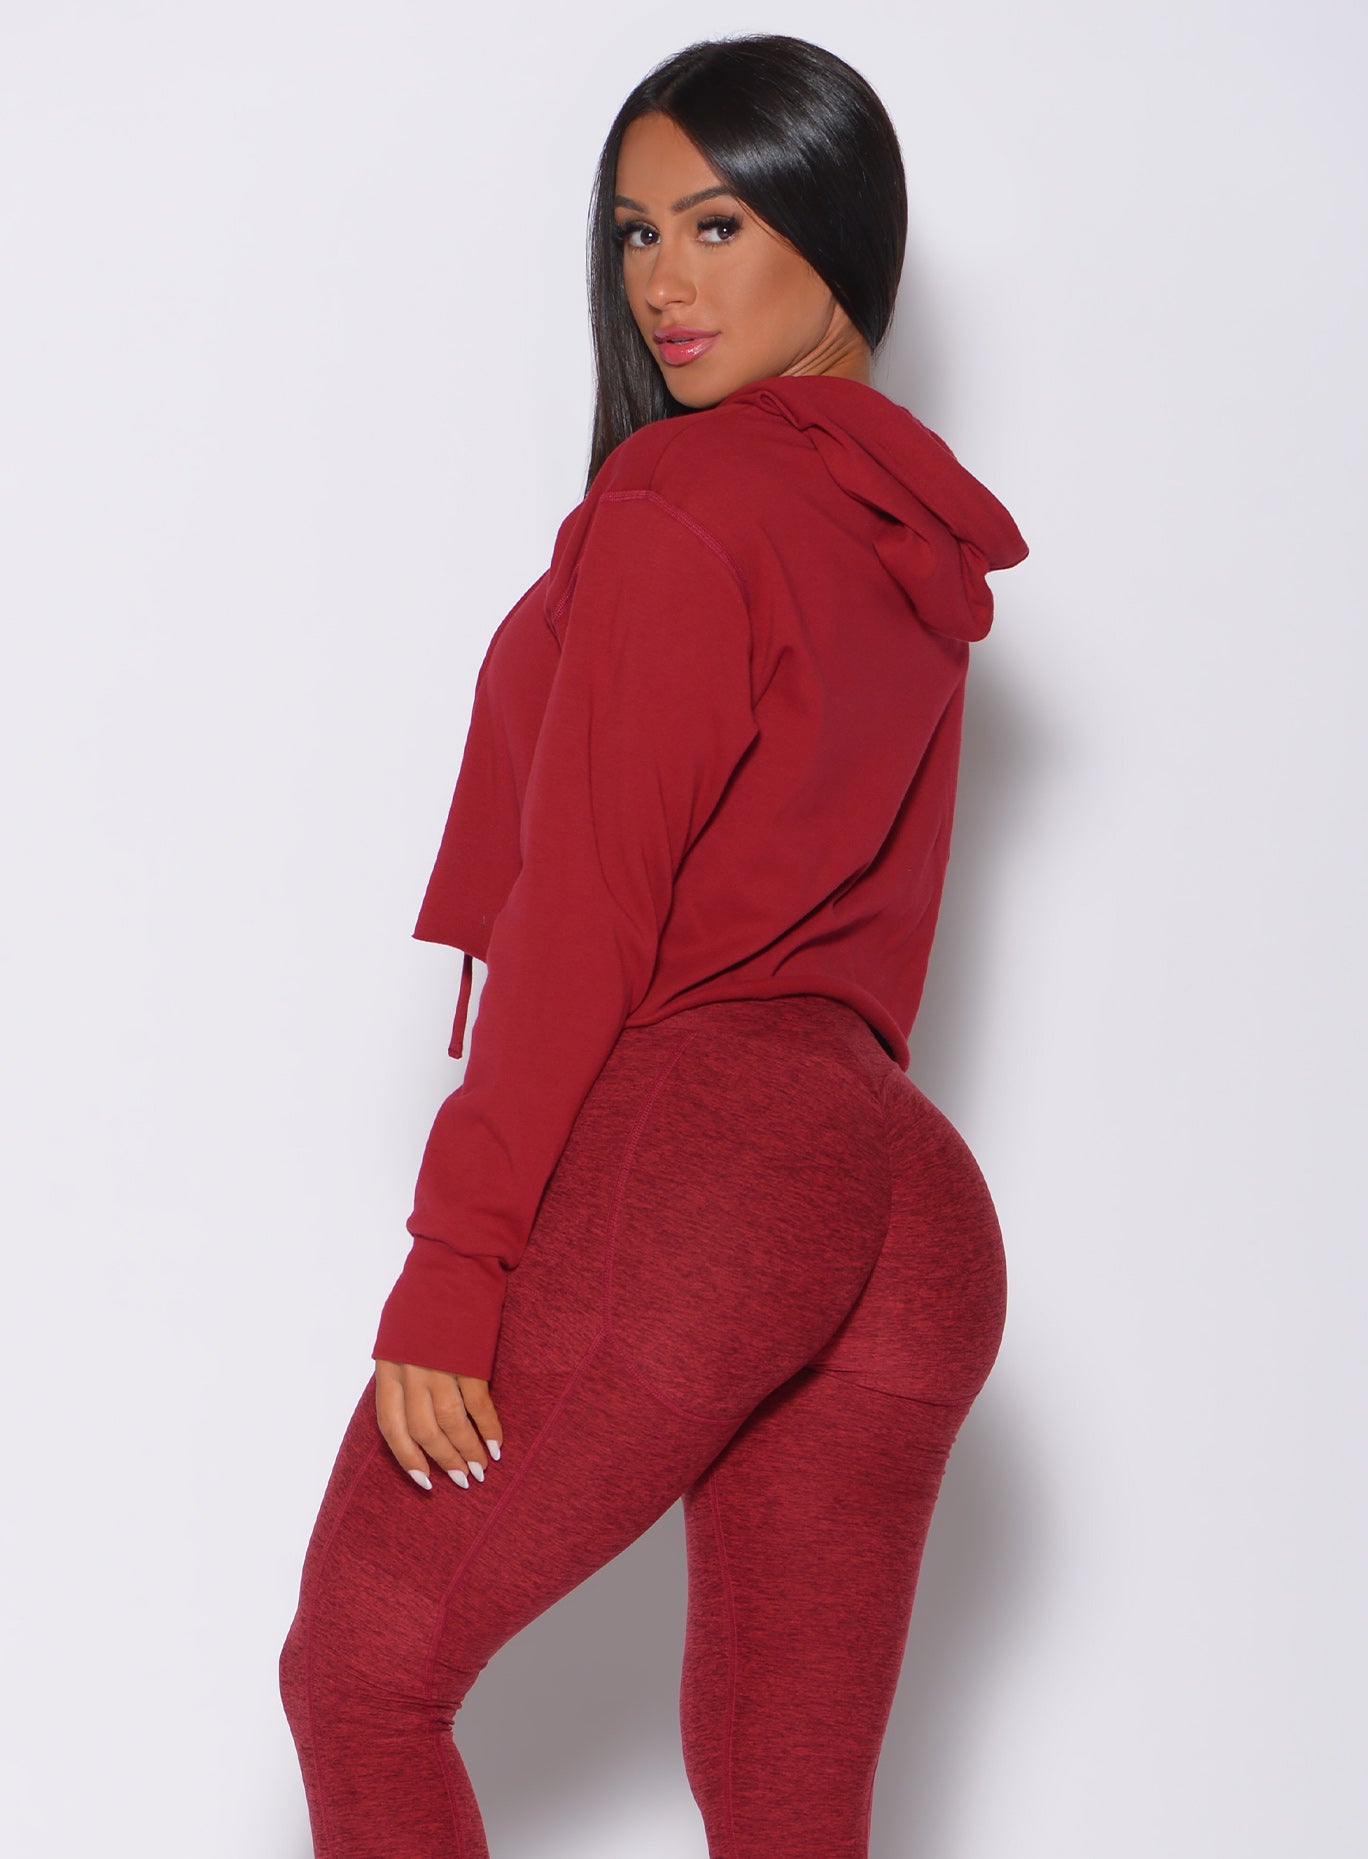 Left side profile view of a model in our bombshell hoodie in red rose color and a matching leggings